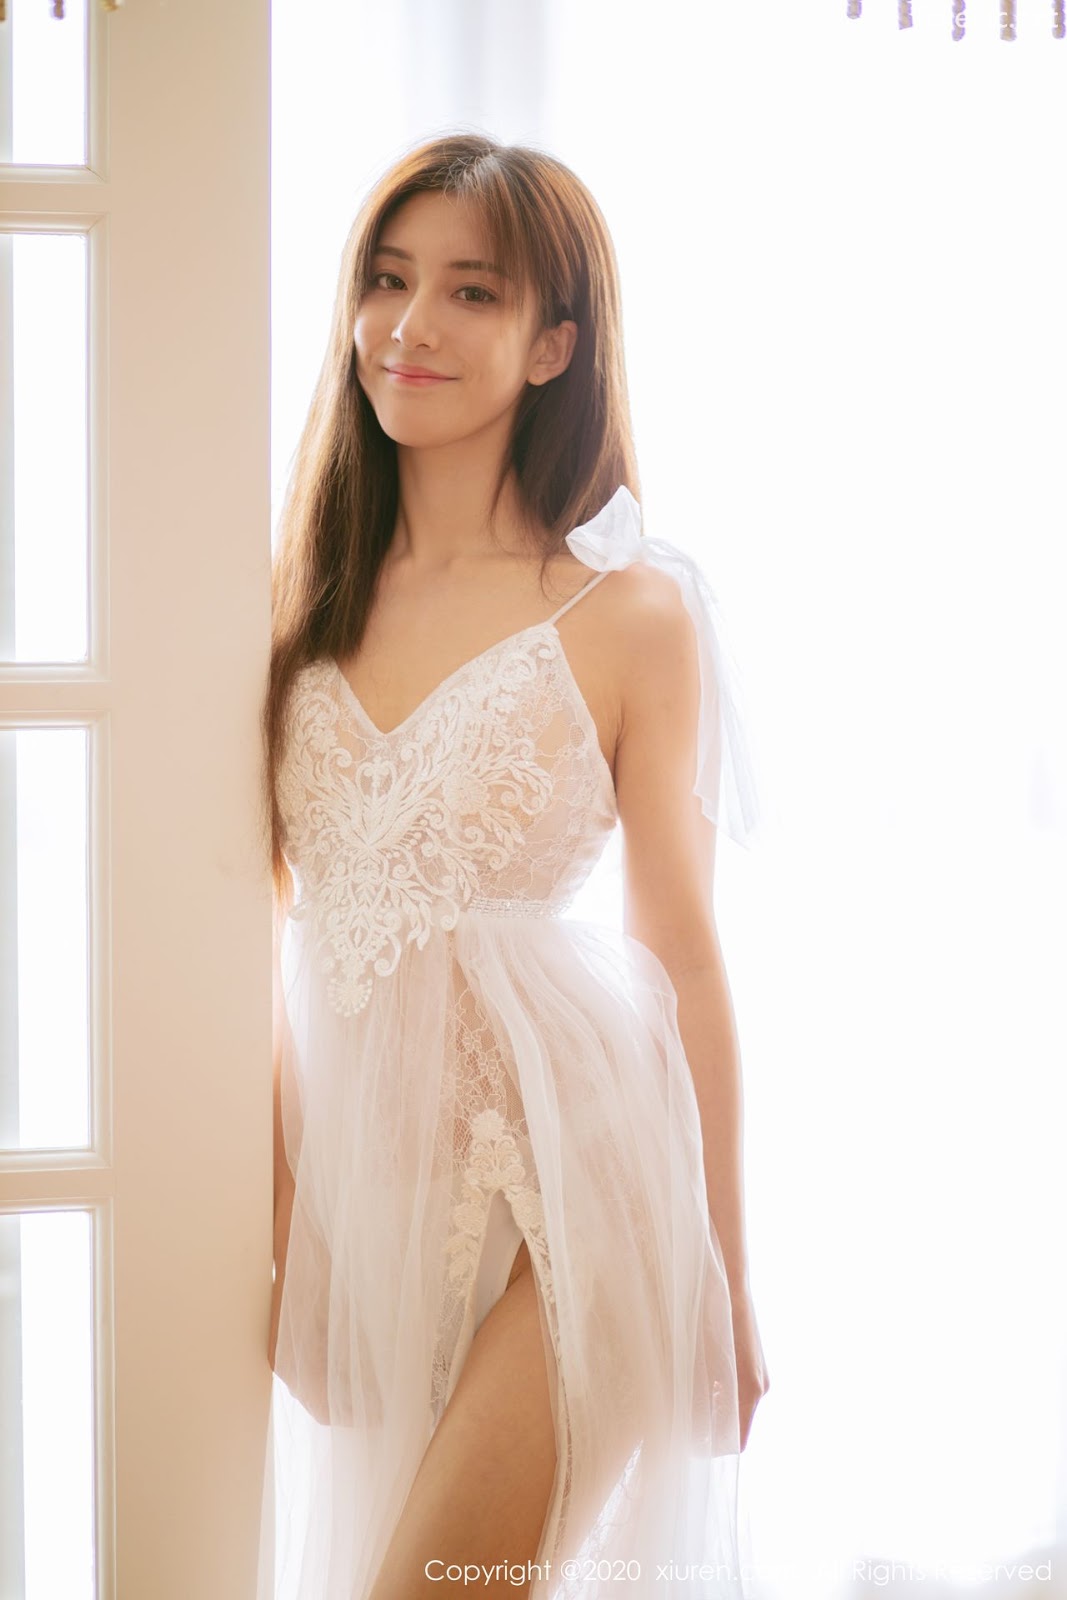 XIUREN No.1914 - Chinese model 林文文Yooki so Sexy with Transparent White Lace Dress - Picture 60